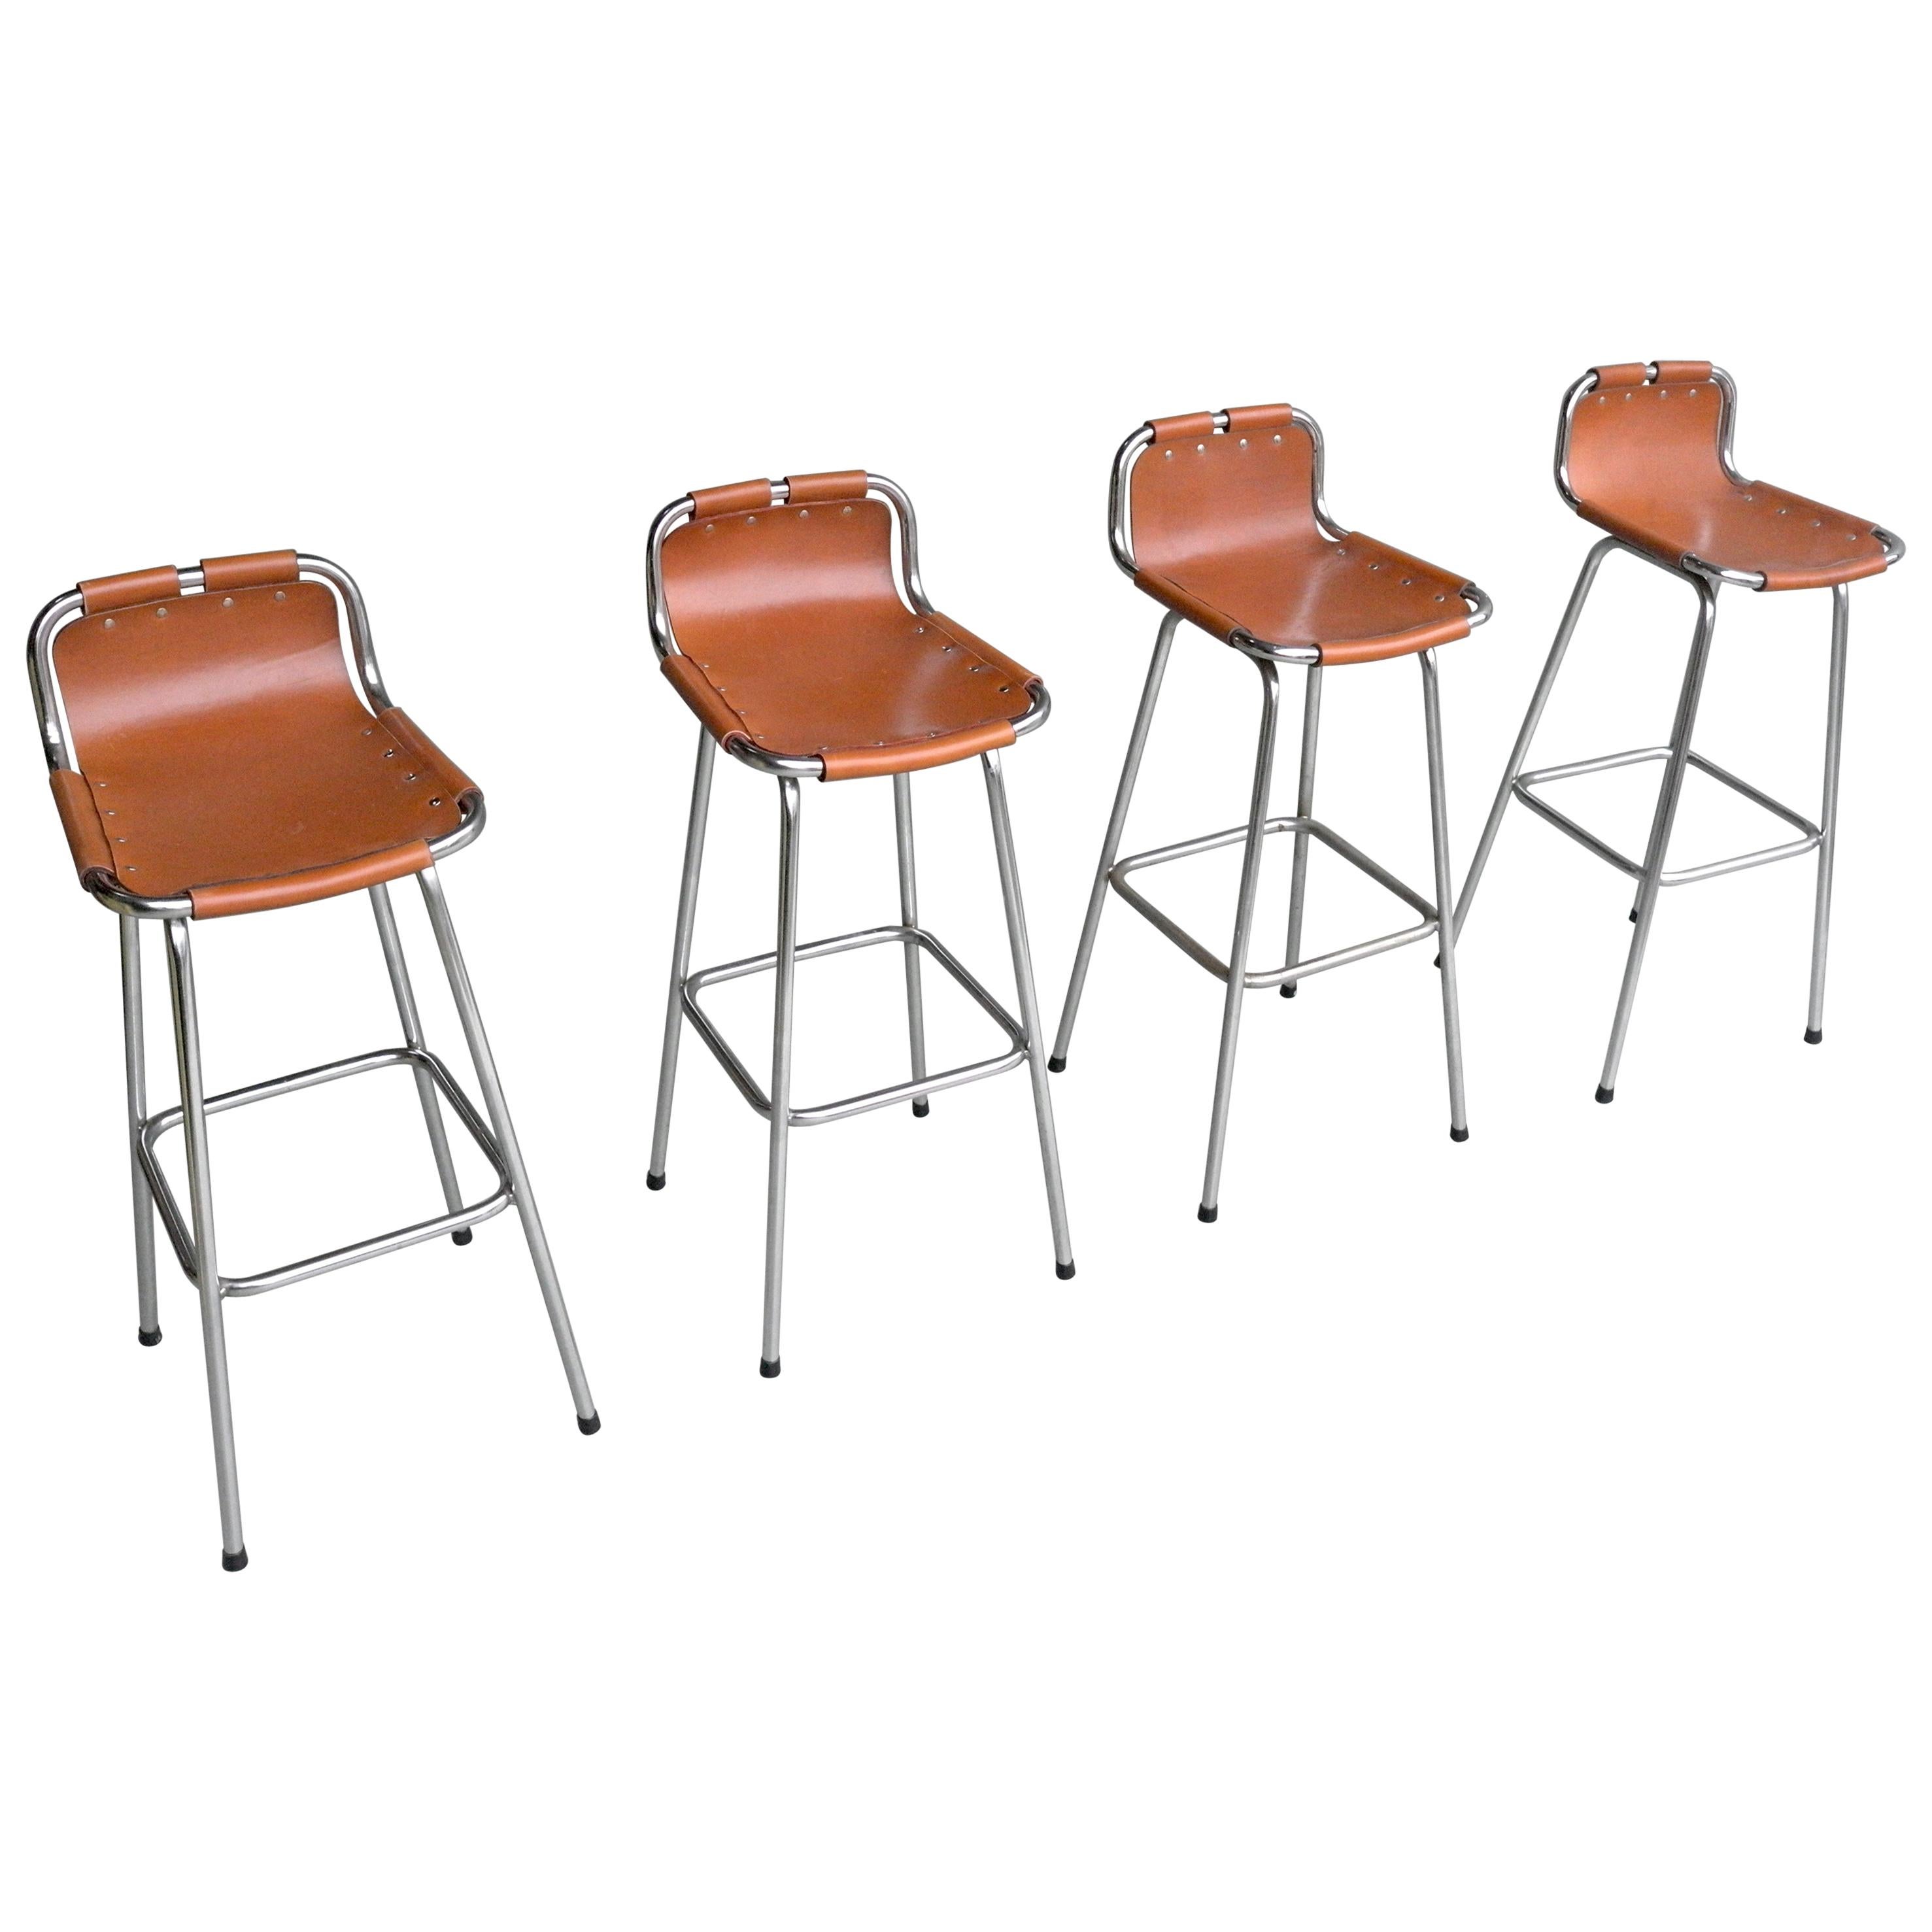 Leather Barstools for Les Arc Ski Resort France, Selected by Charlotte Perriand